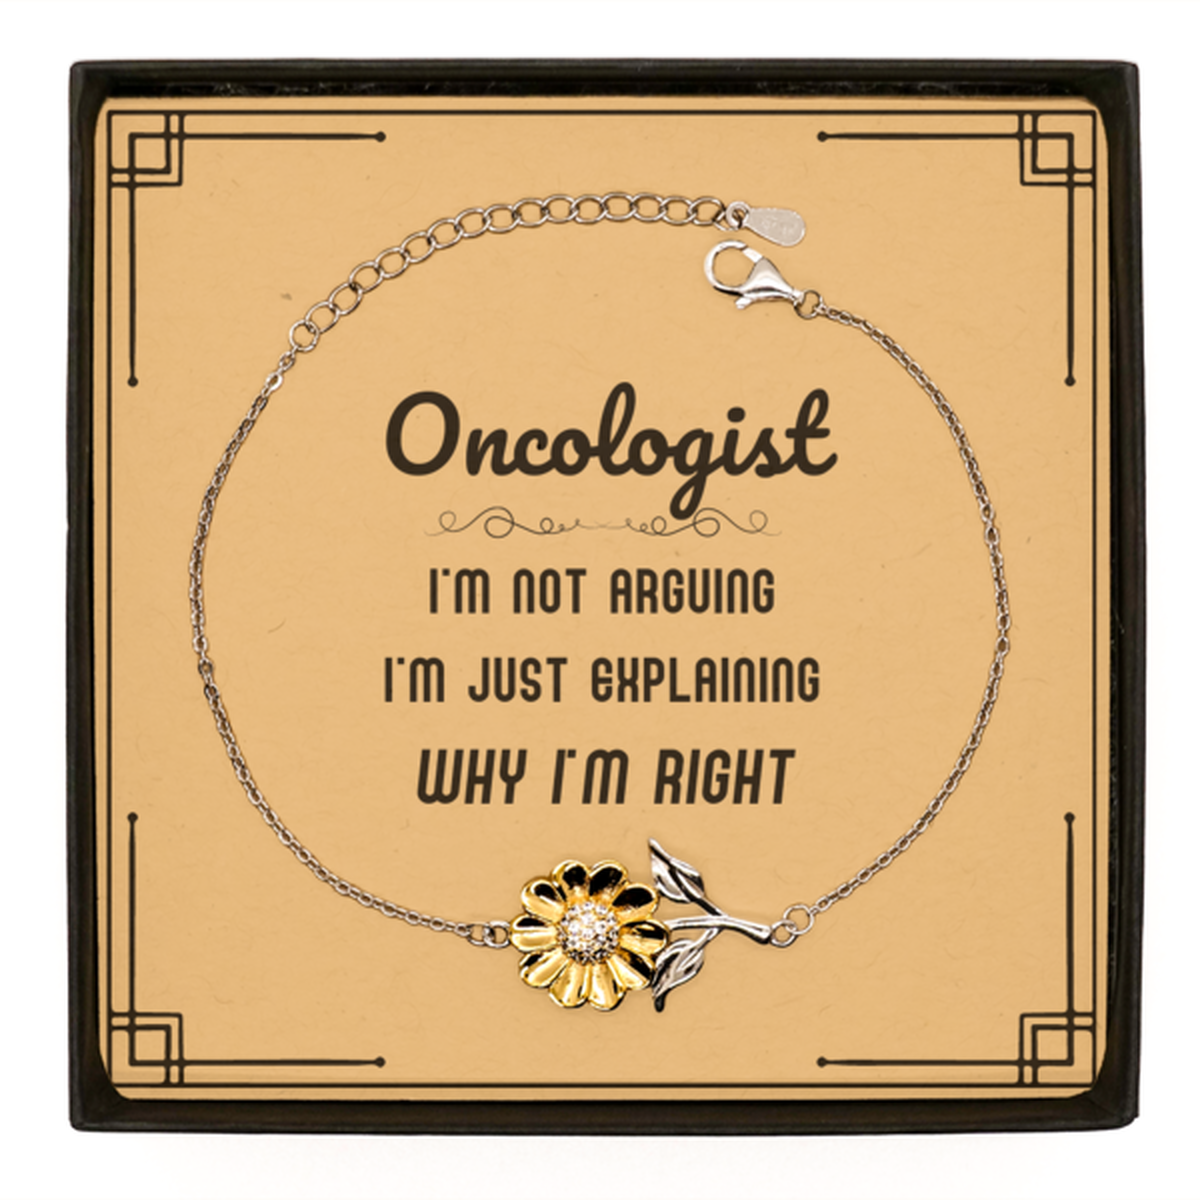 Oncologist I'm not Arguing. I'm Just Explaining Why I'm RIGHT Sunflower Bracelet, Funny Saying Quote Oncologist Gifts For Oncologist Message Card Graduation Birthday Christmas Gifts for Men Women Coworker